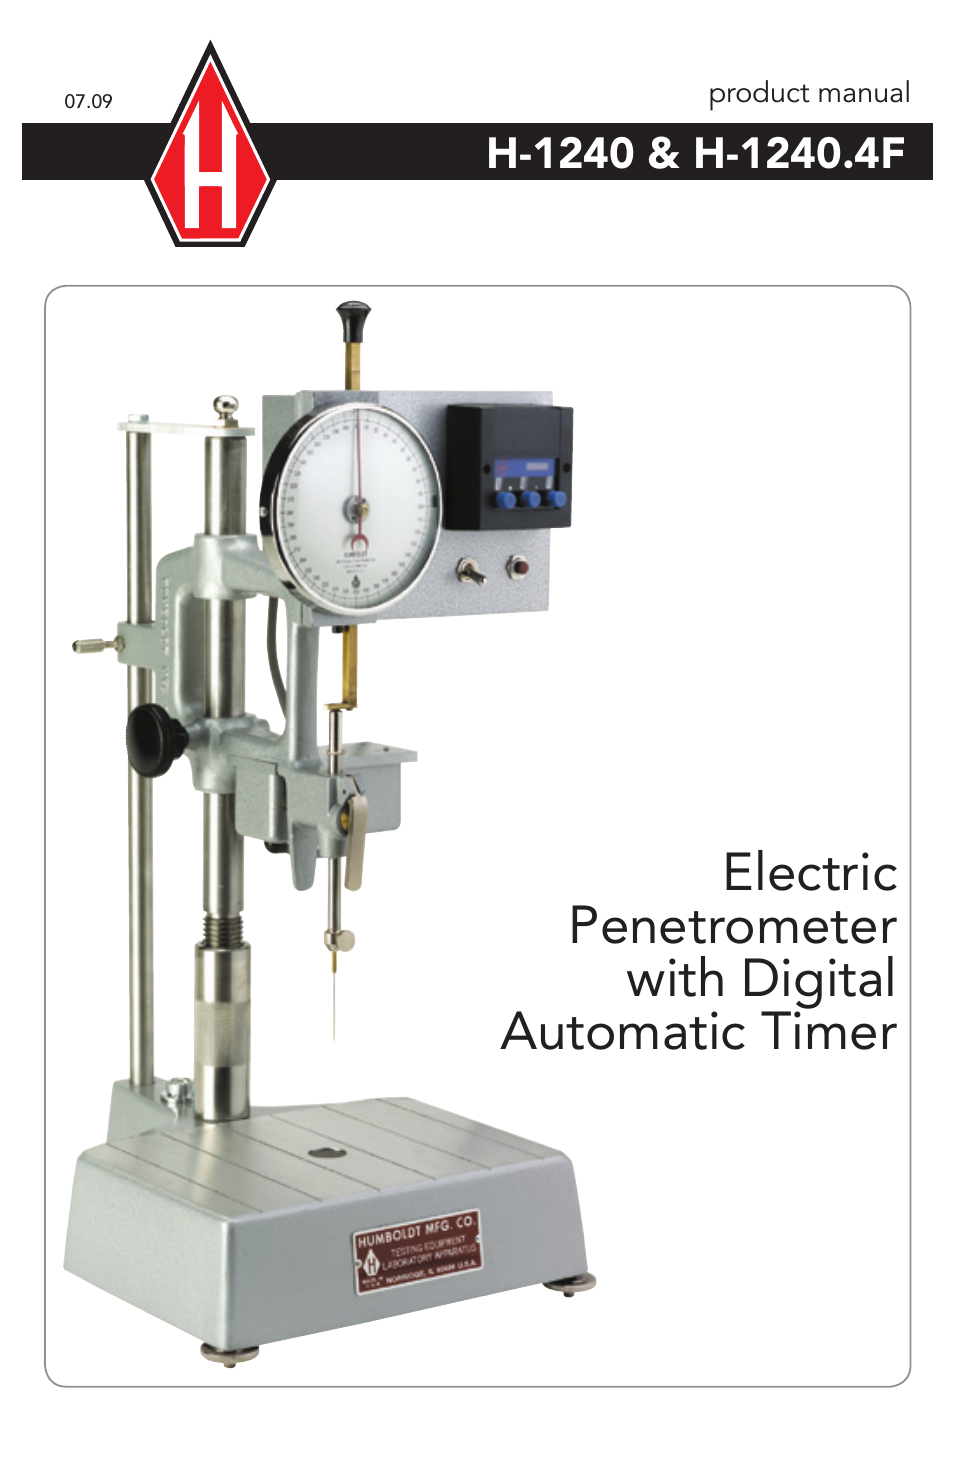 H-1240 Electric Penetrometer with Digital Automatic Timer